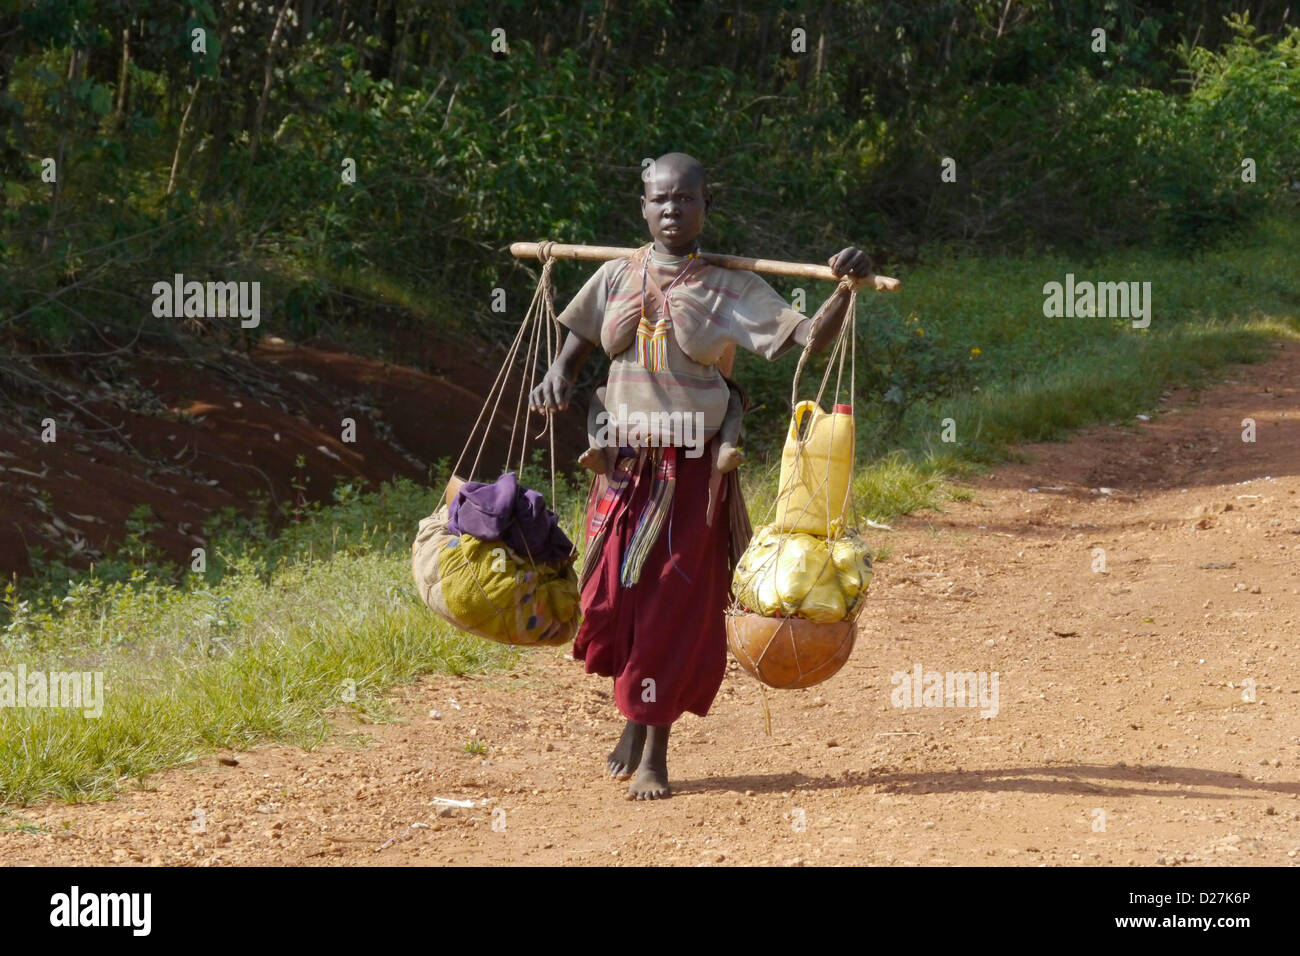 ETHIOPIA On the road between Chagni and Debate, Beni Shangul Gumuz region. Gumuz woman carrying good to or from market. Stock Photo